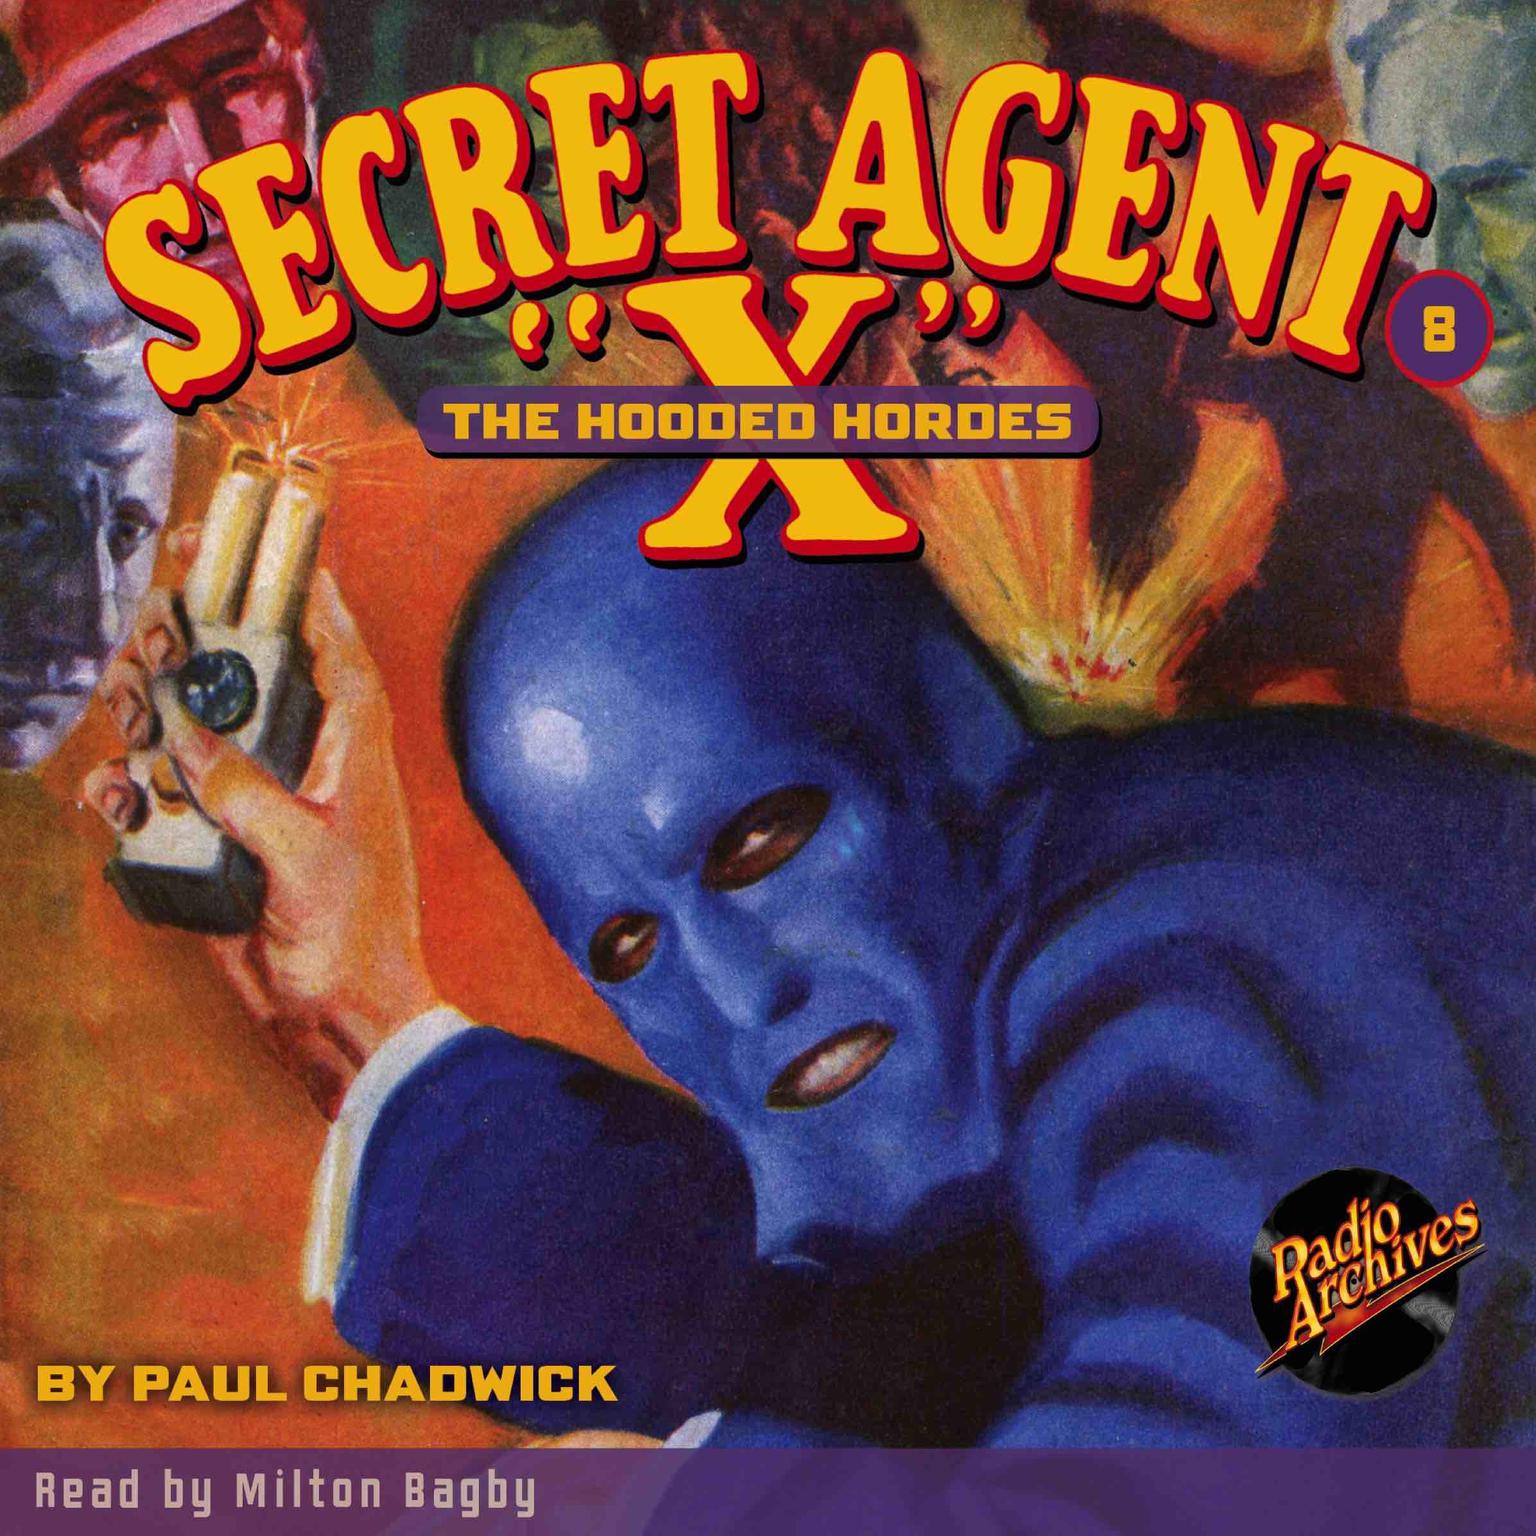 Secret Agent X: The Hooded Hordes Audiobook, by Paul Chadwick